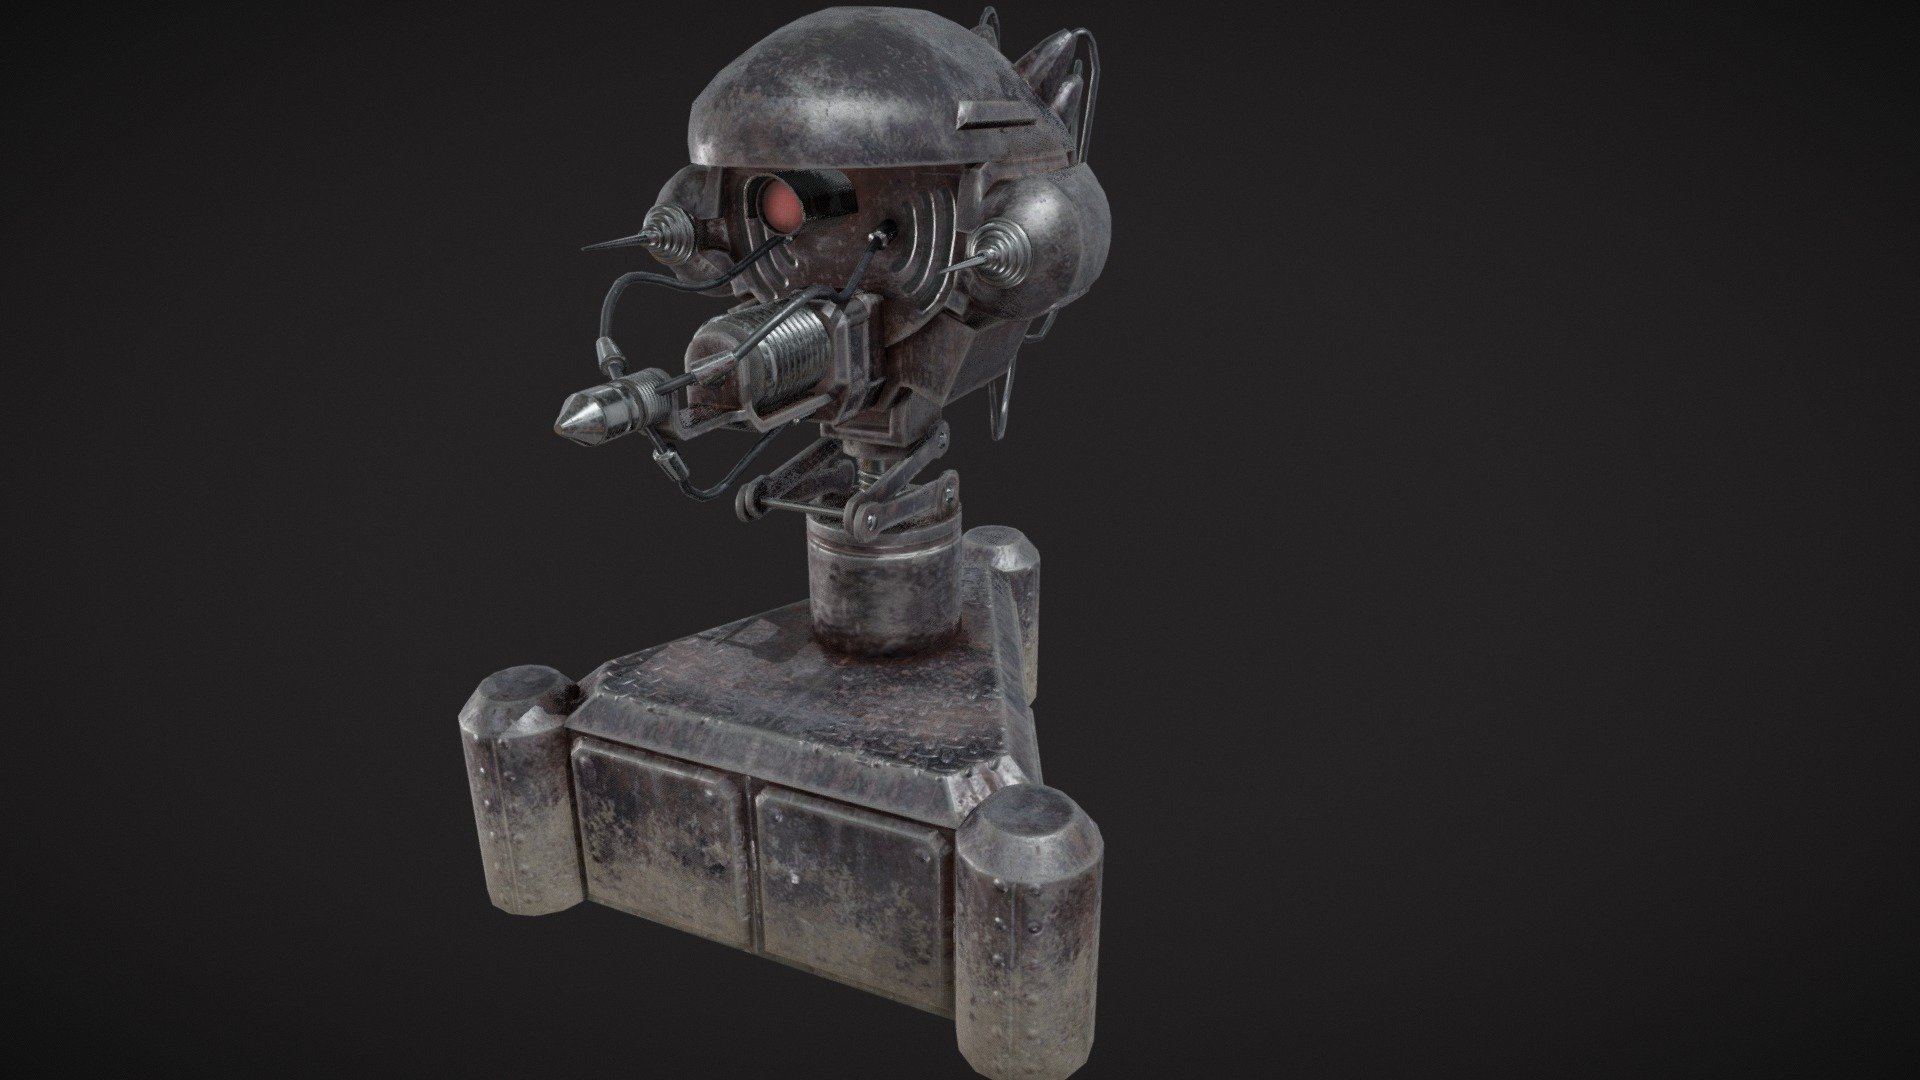 A re-modeling of my old Enclave Turret, to be used in the mod project Fallout: Miami.  The design is based from the Fallout: 3 concept art of it, and the model seen used by the Enclave in that game. 

Modeled in 3ds Max, and textured in Substance Painter, along with some touch-up in Photoshop. 

Created for the Fallout 4 engine, so there are a few oddities, such as the chrome-ish metal not having much detail 3d model